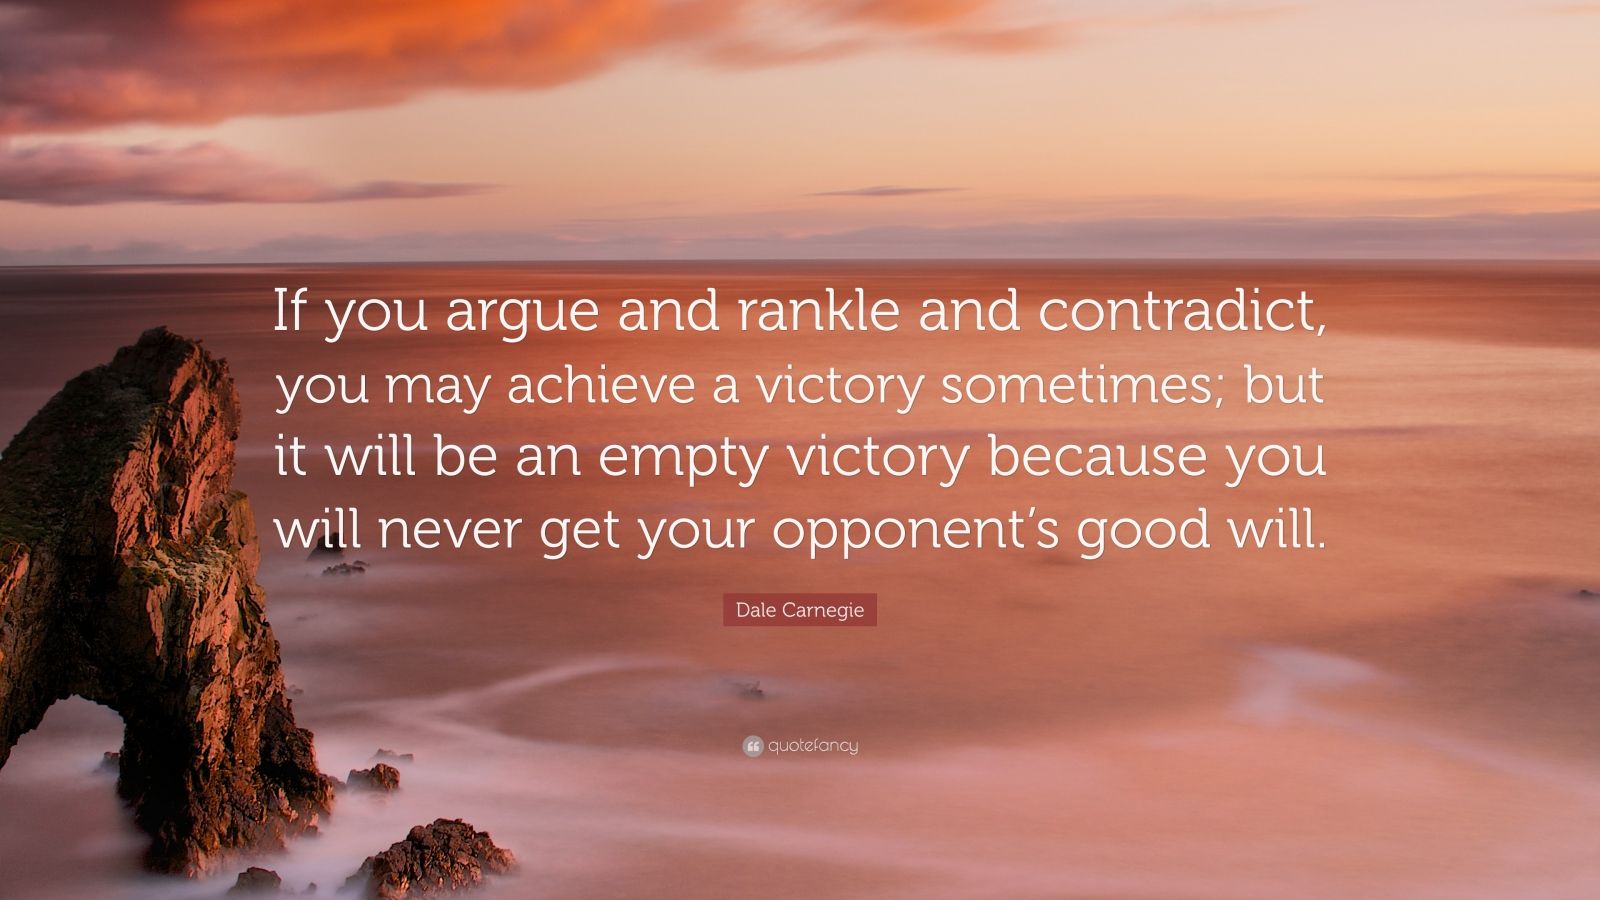 Dale Carnegie Quote: “If you argue and rankle and contradict, you may ...